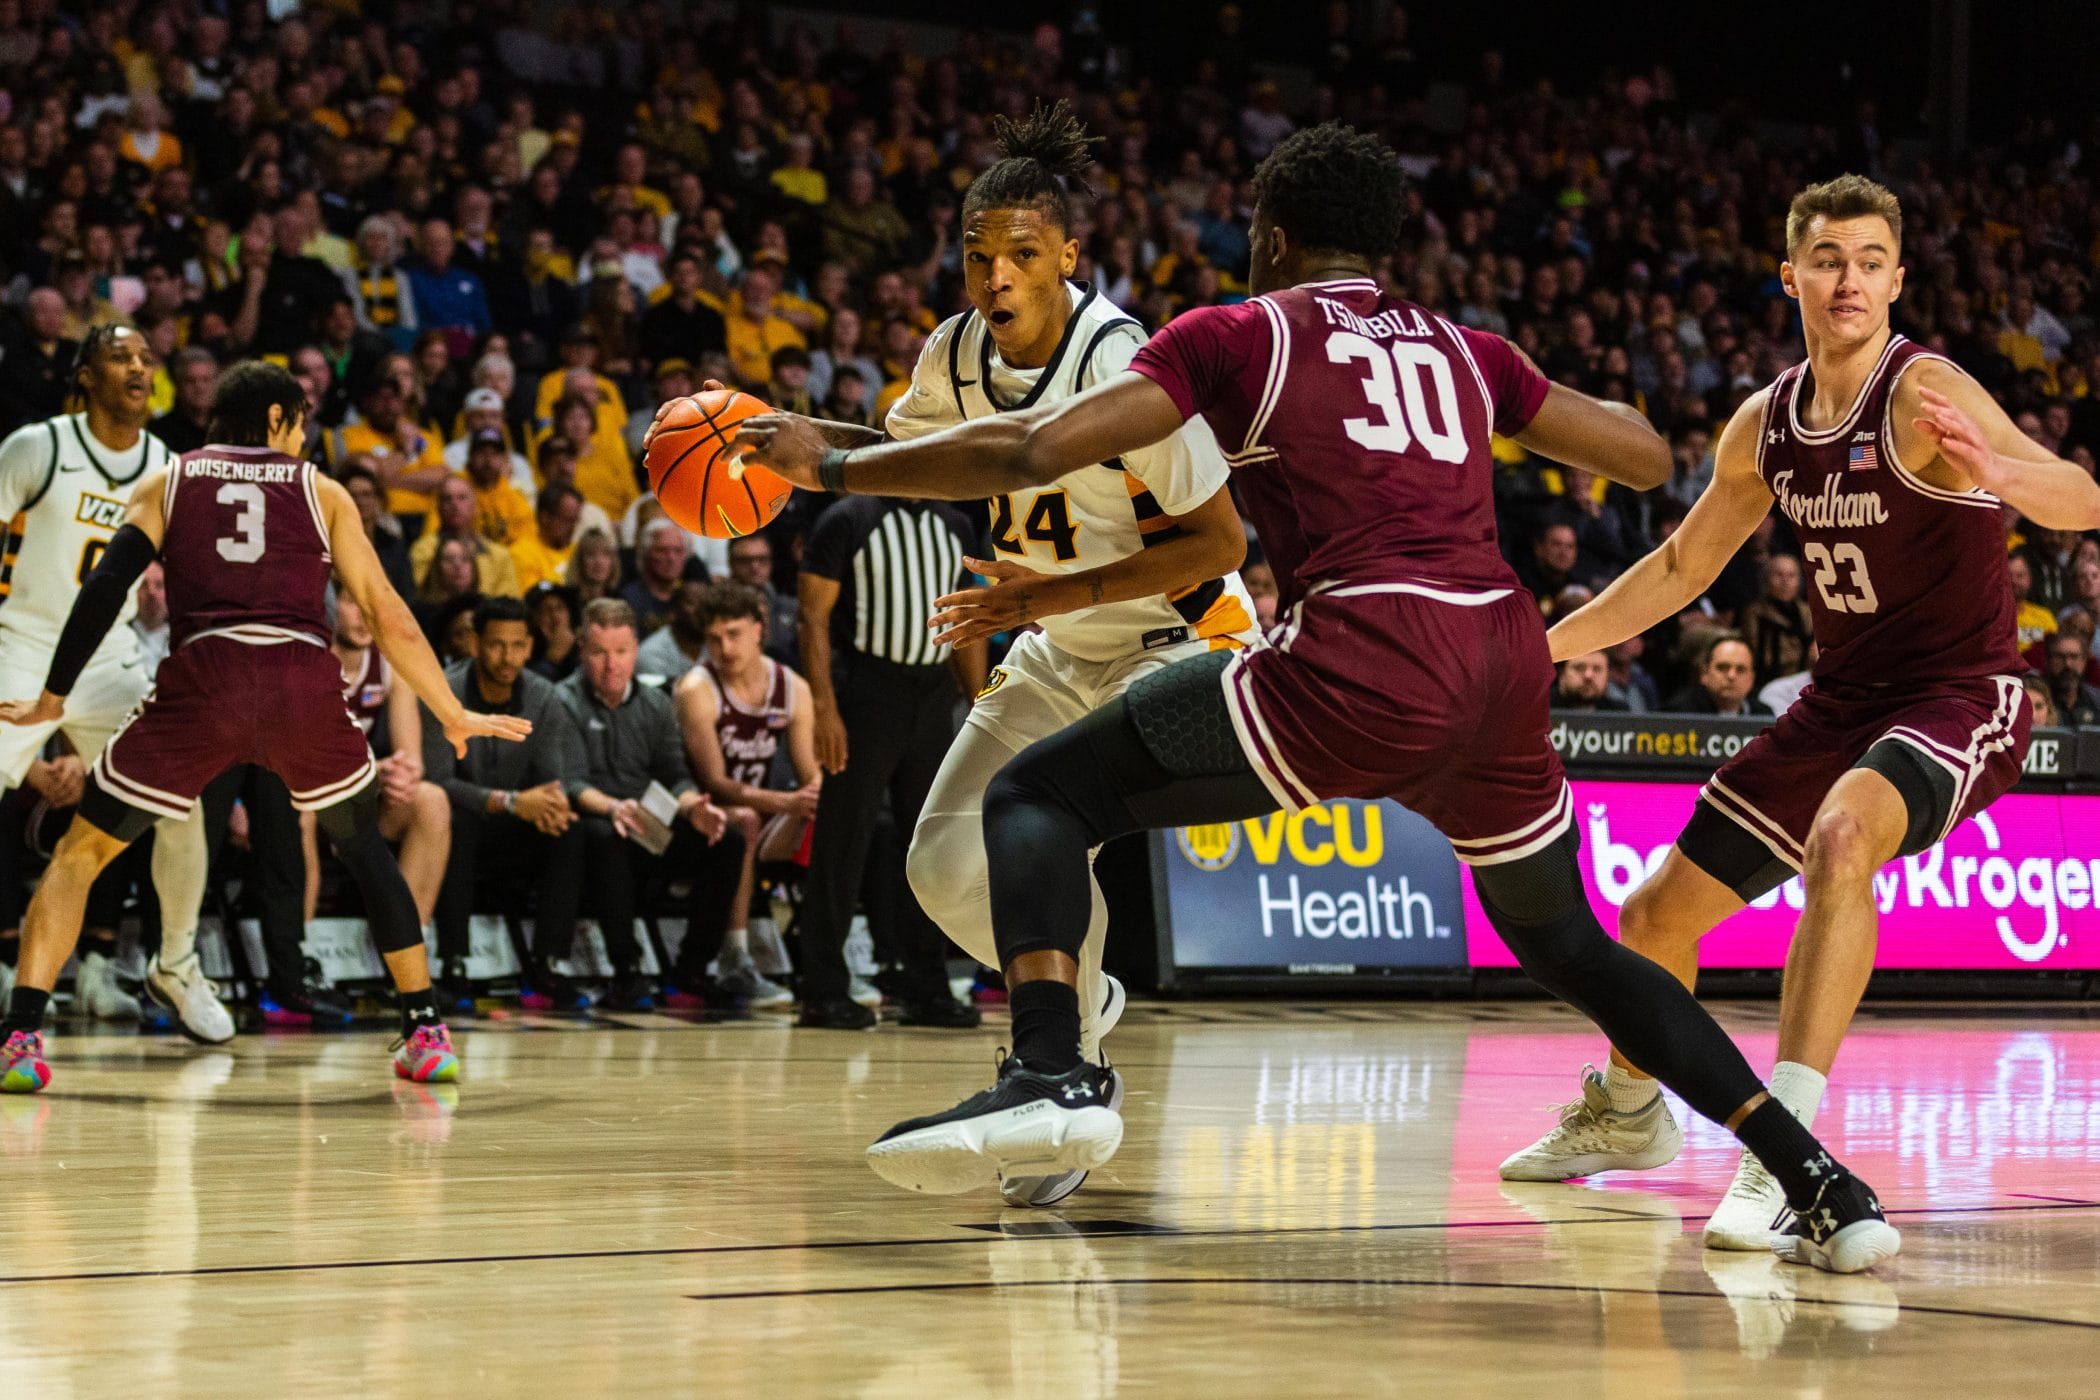 VCU earns game win against Fordham, 8061 The Commonwealth Times